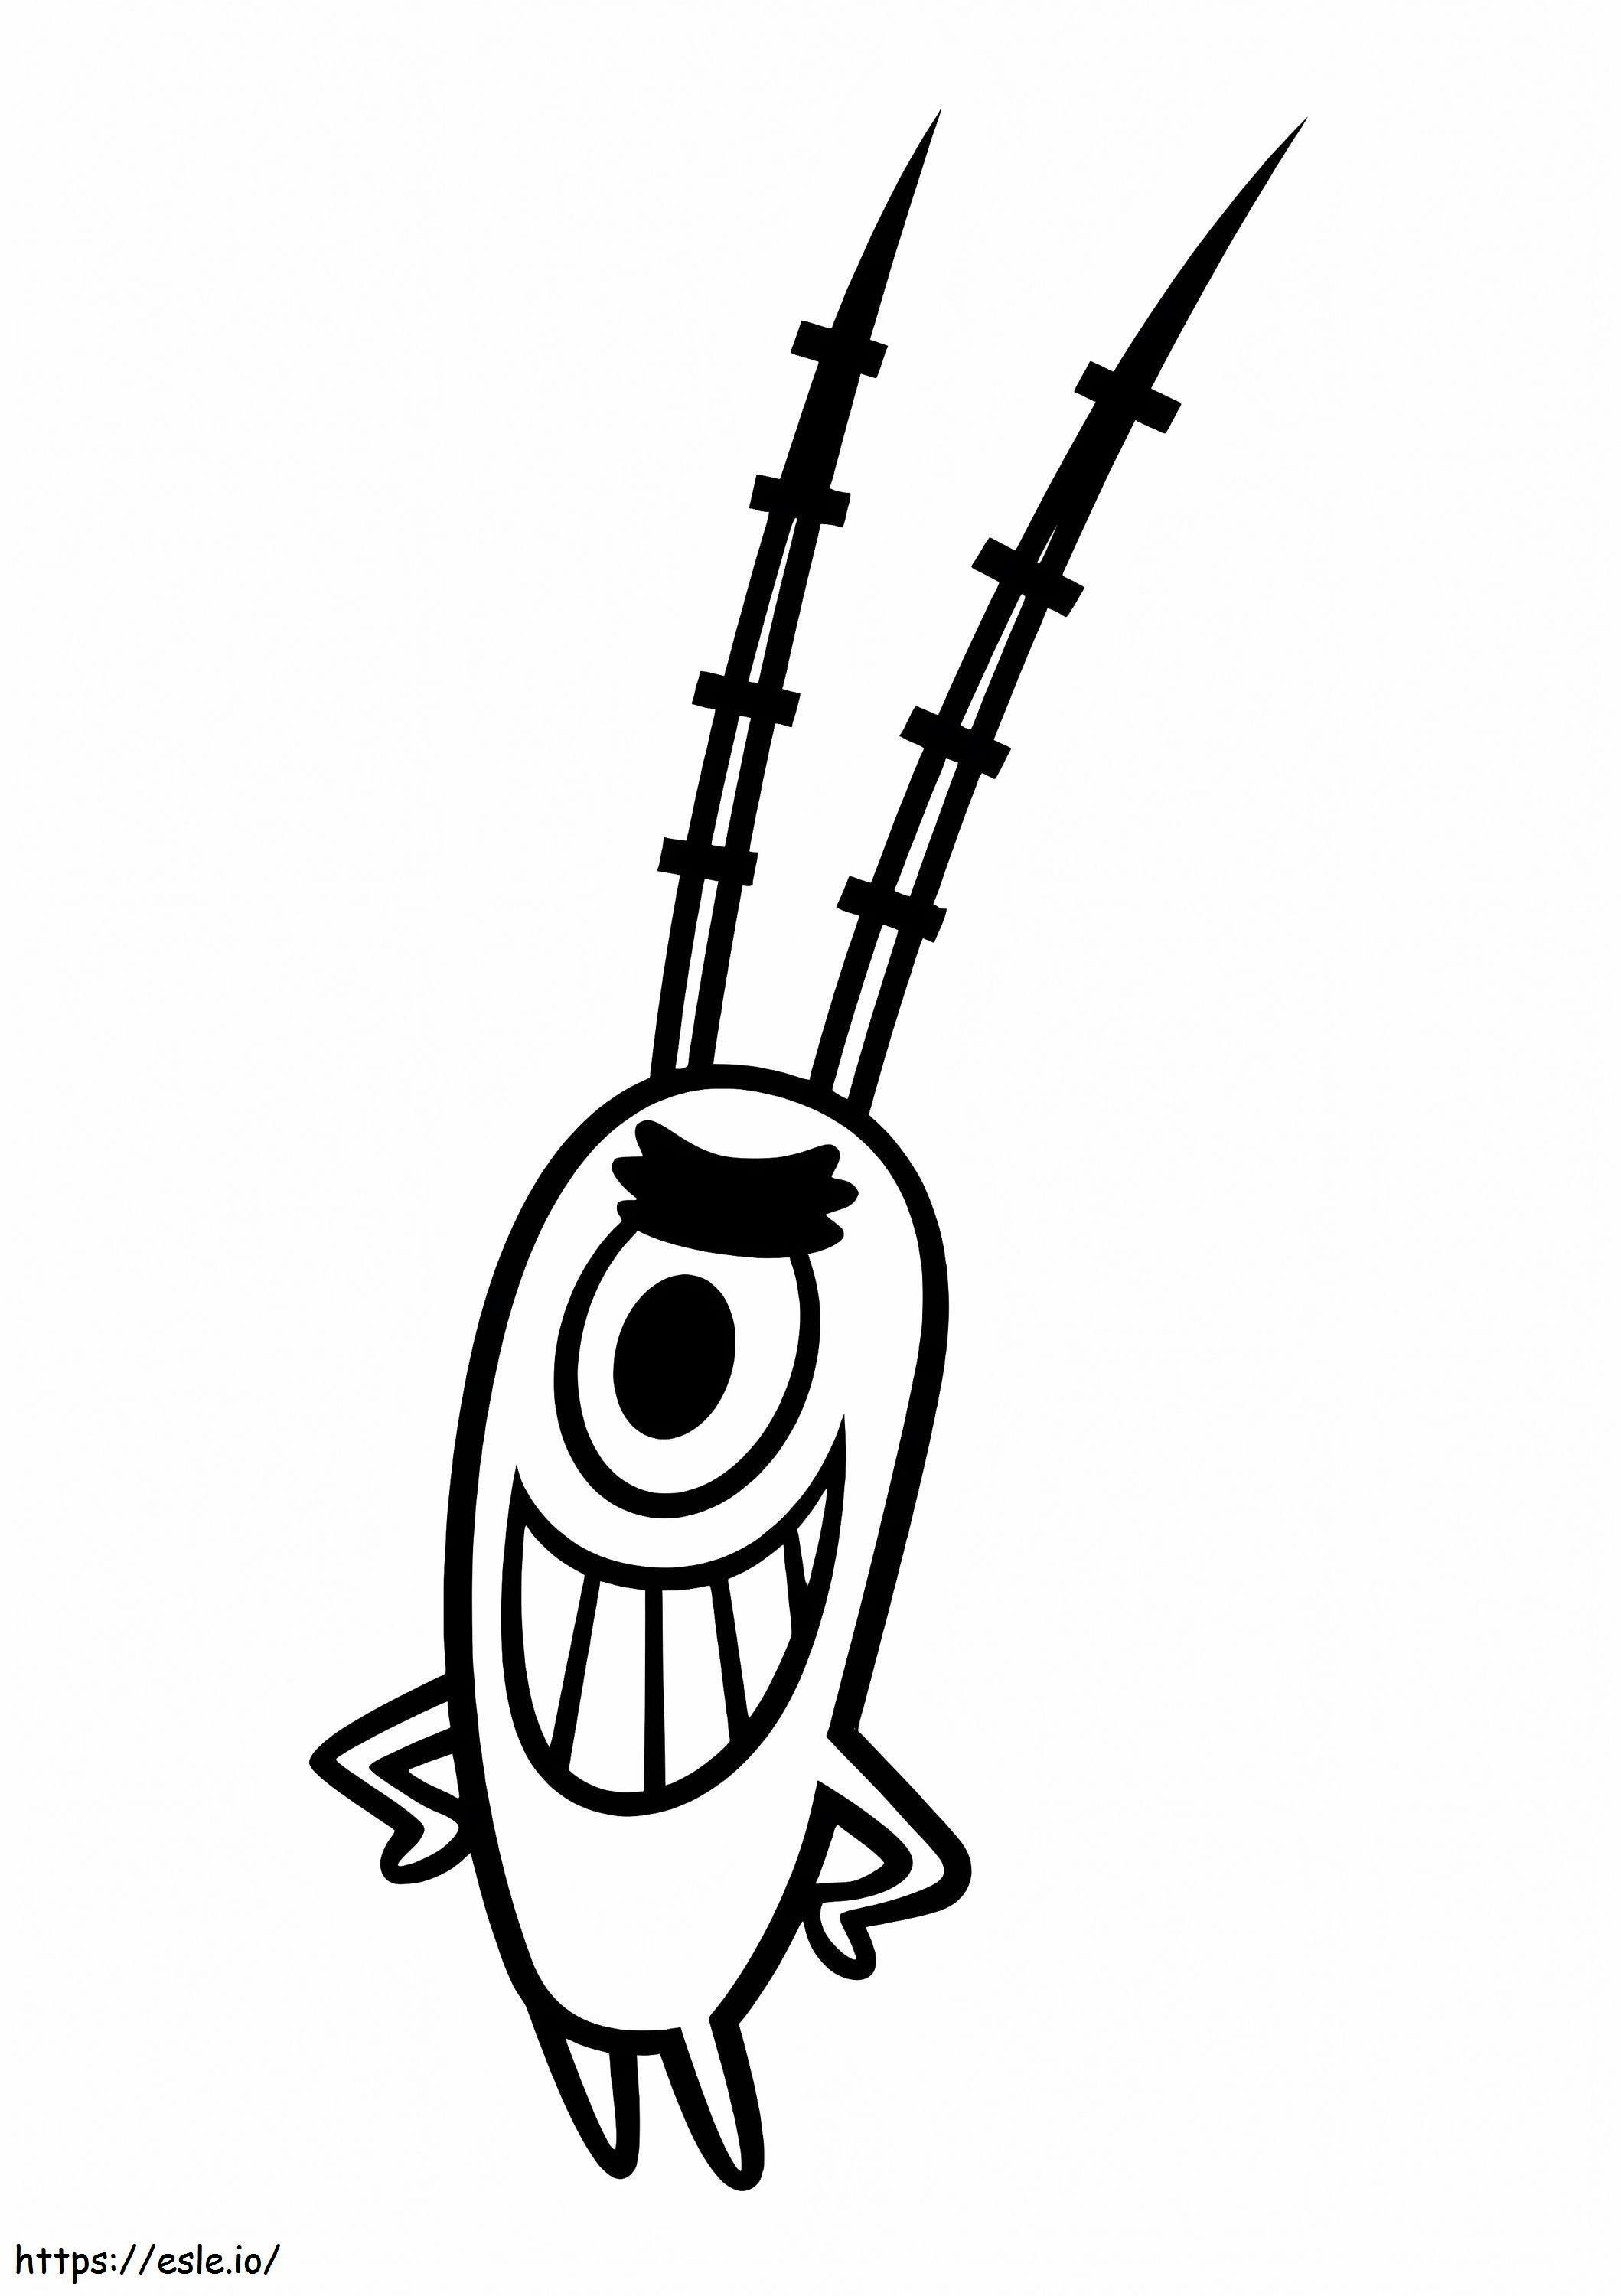 Plankton Smiling coloring page